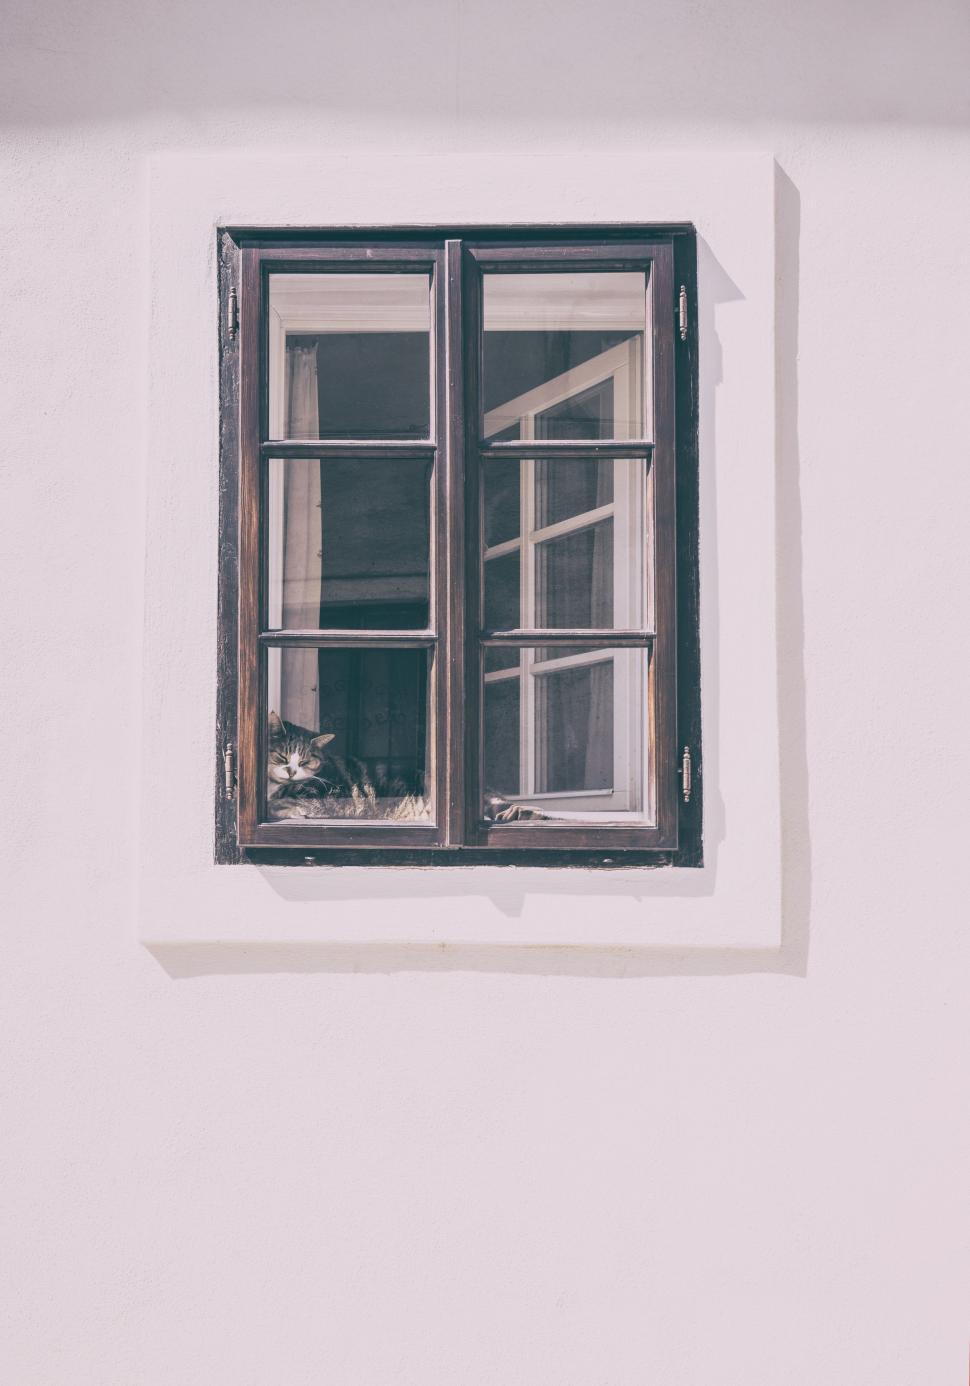 Free Image of Cat Looking Out the Window 